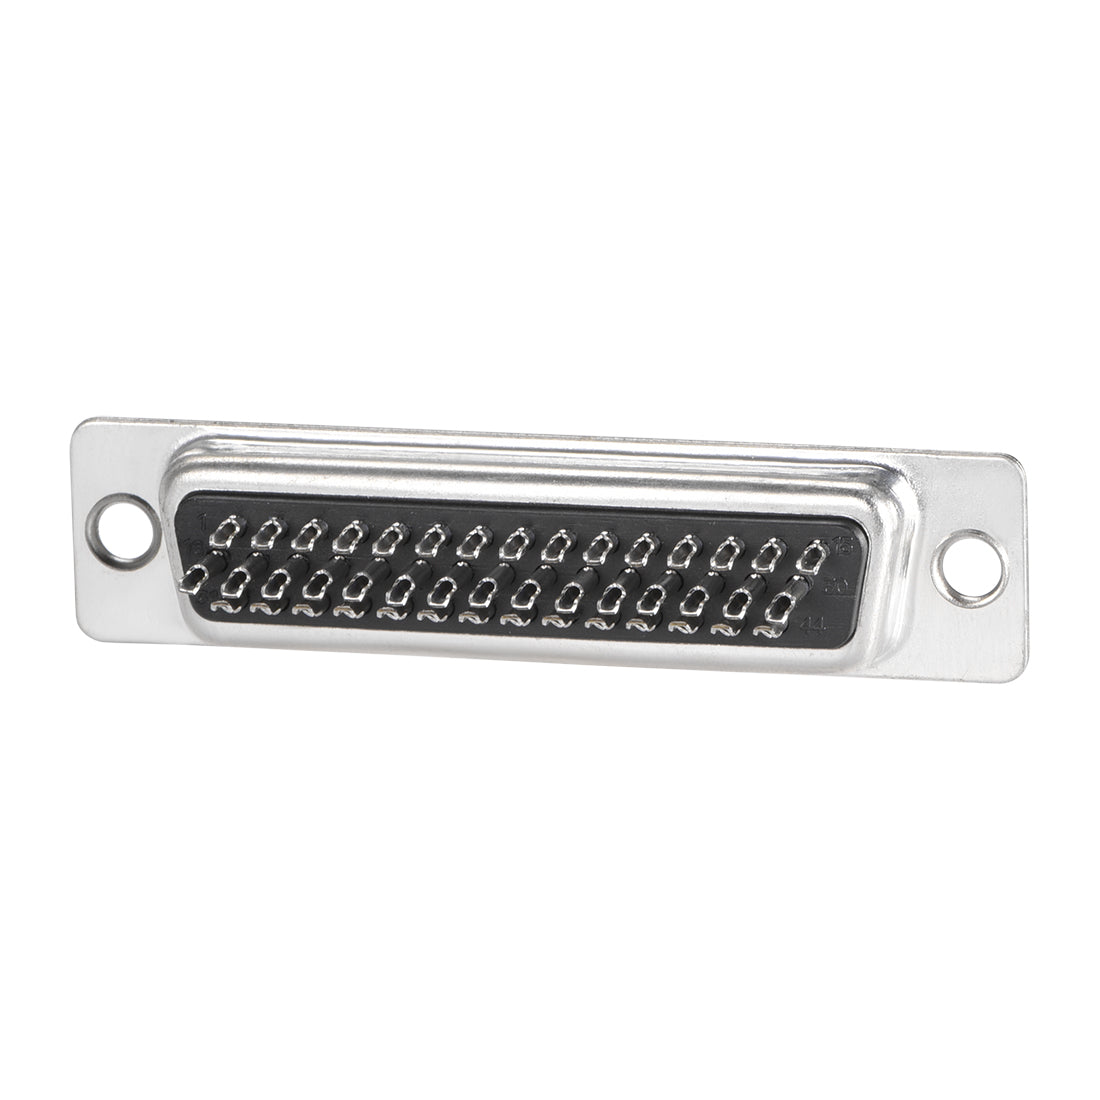 uxcell Uxcell D-sub Connector DB44 Female Socket 44-pin 3-row High Density Port Terminal Breakout for Mechanical Equipment CNC Computers Instrumentation 1pc